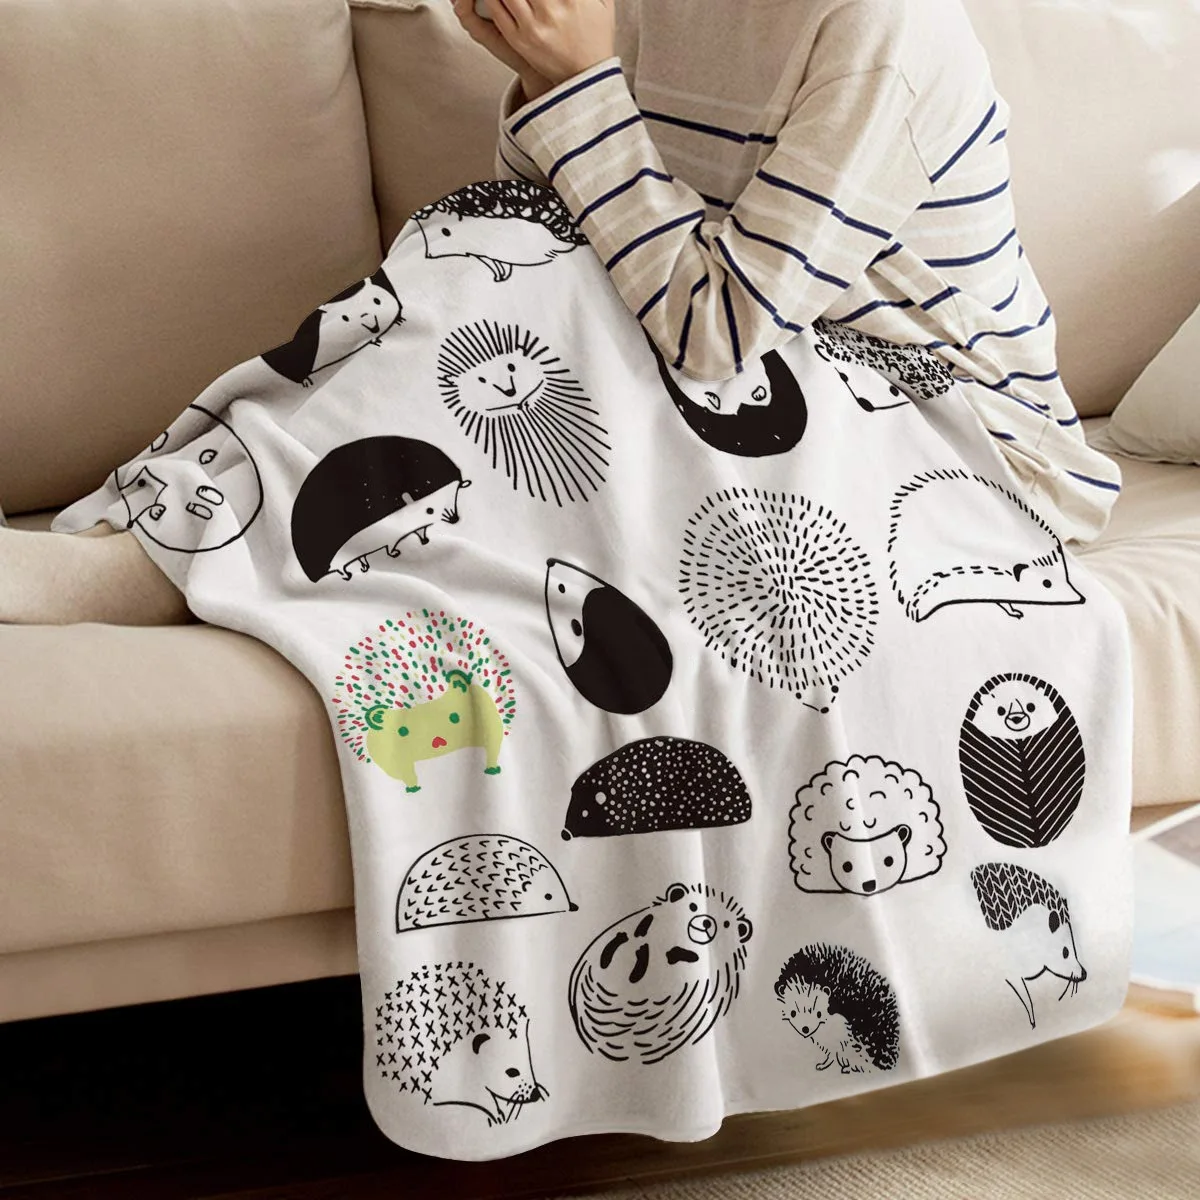 Winter Thickening Rugs Cartoon Printed Flannel Blanket Infant Children Nap Printing Blankets Quick Dry Towel Plage Accessoir